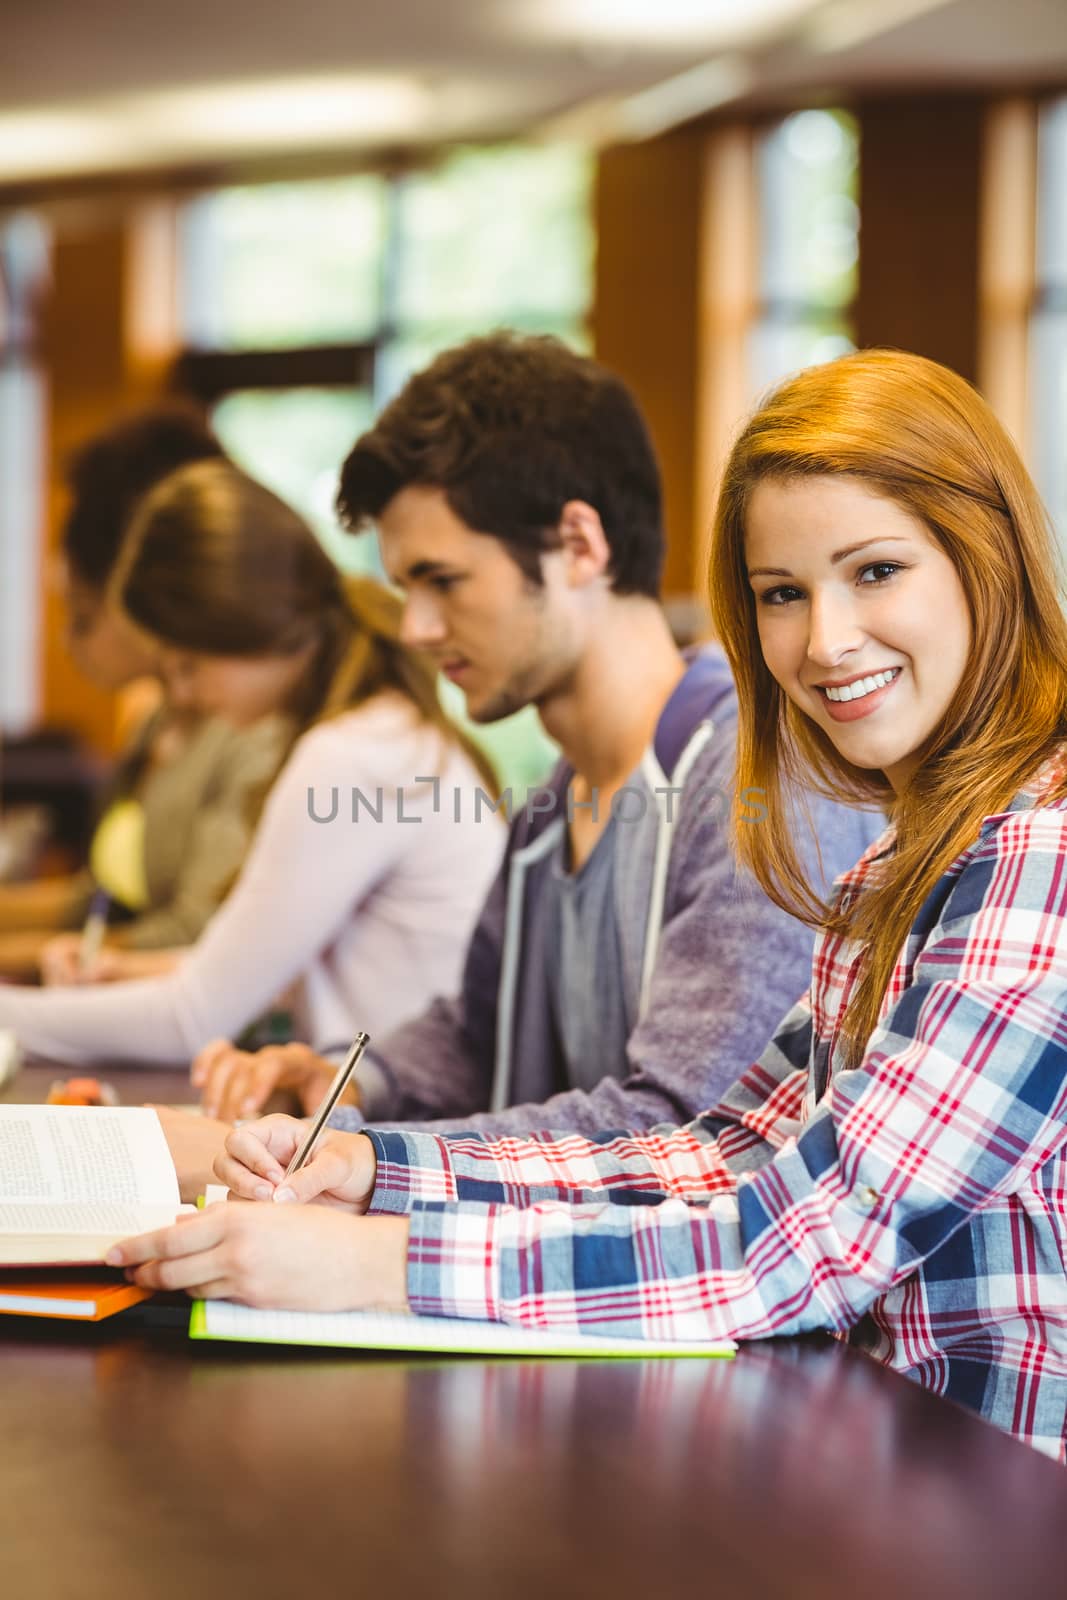 Student looking at camera while studying with classmates in library